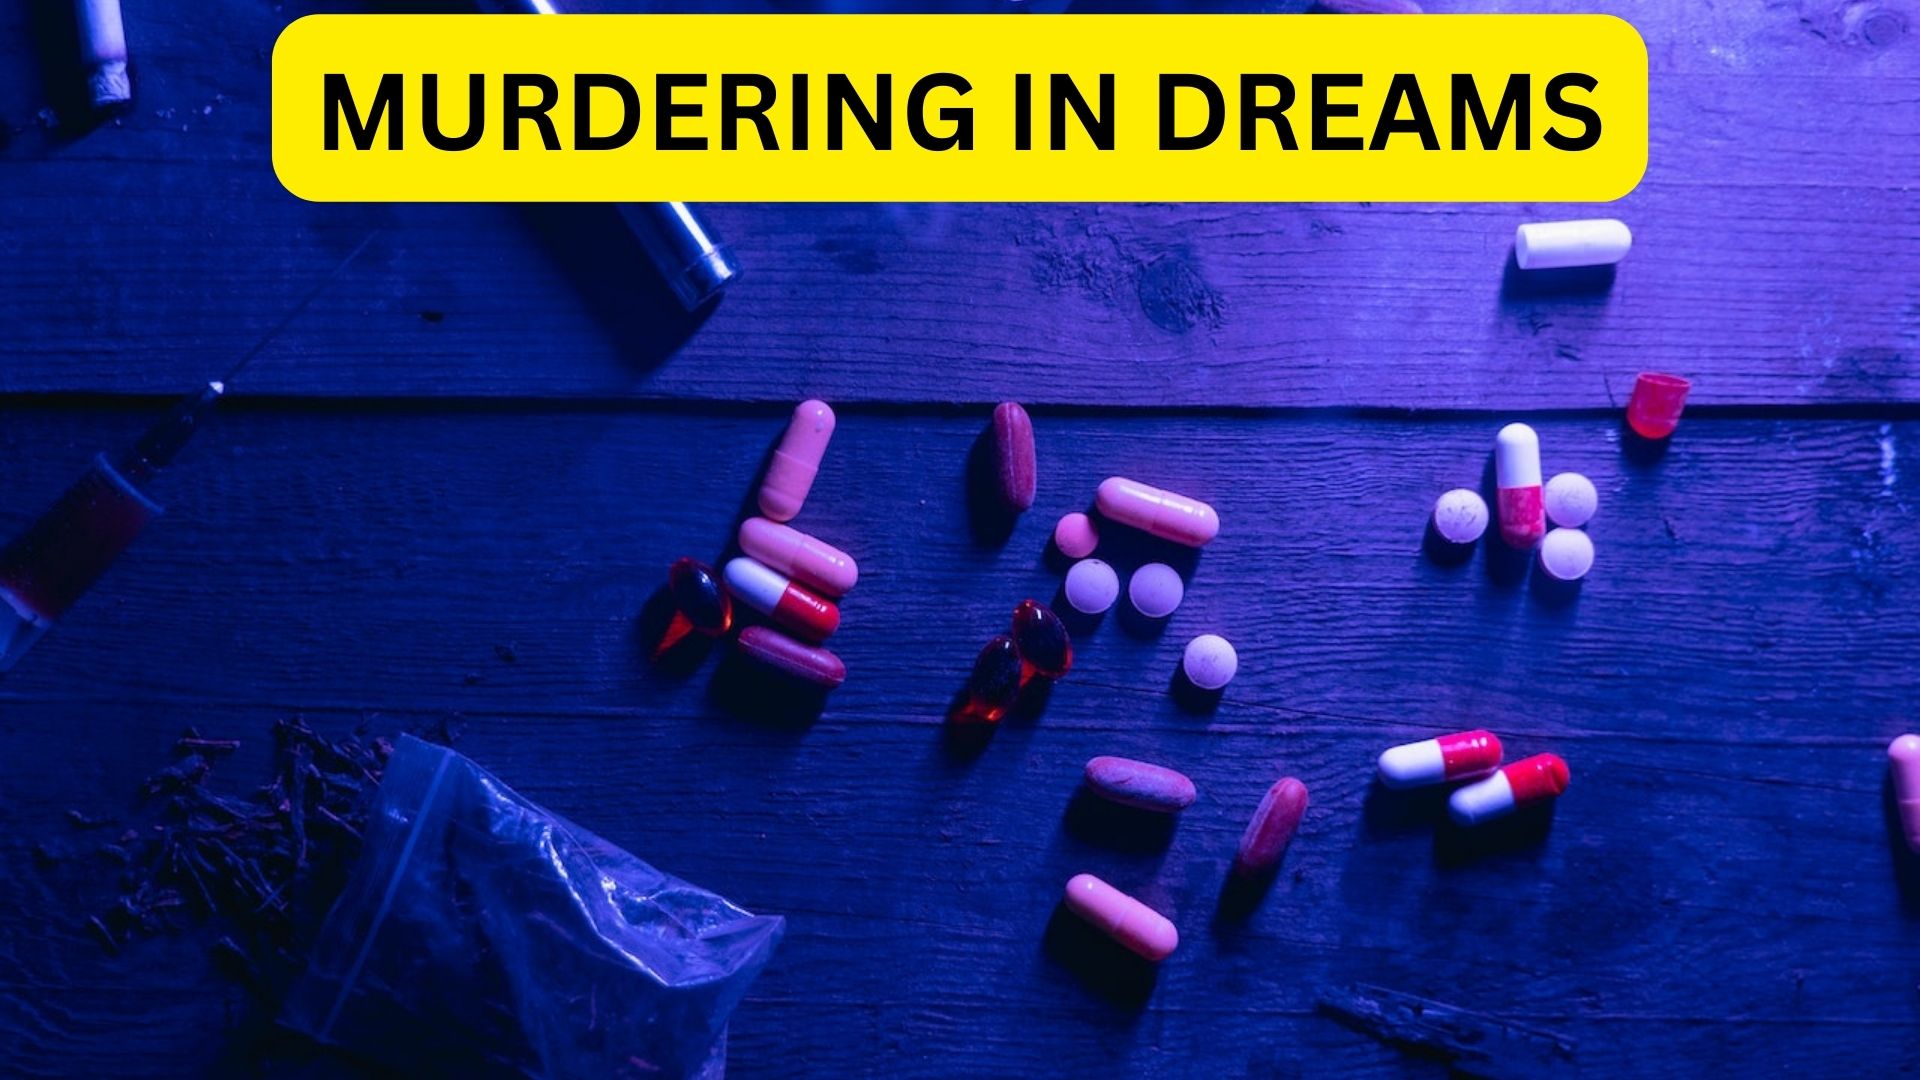 Murdering In Dreams - Aggression, Anger, And Conflict In Life